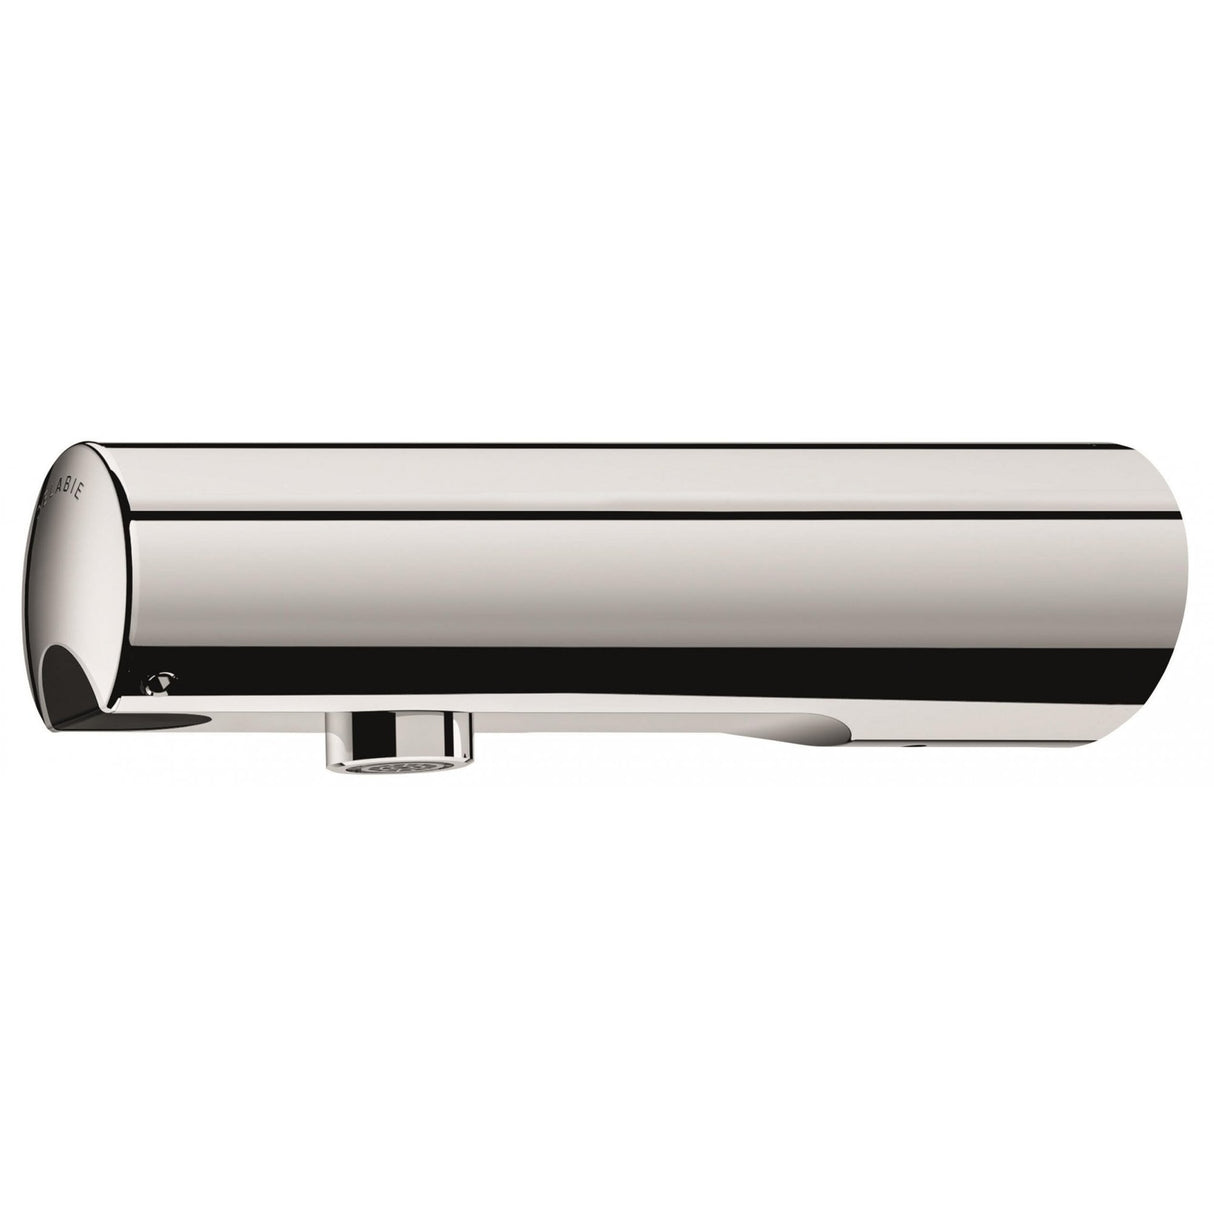 443400 / 443406 DELABIE TEMPOMATIC Wall Mounted 130mm Electronic tap